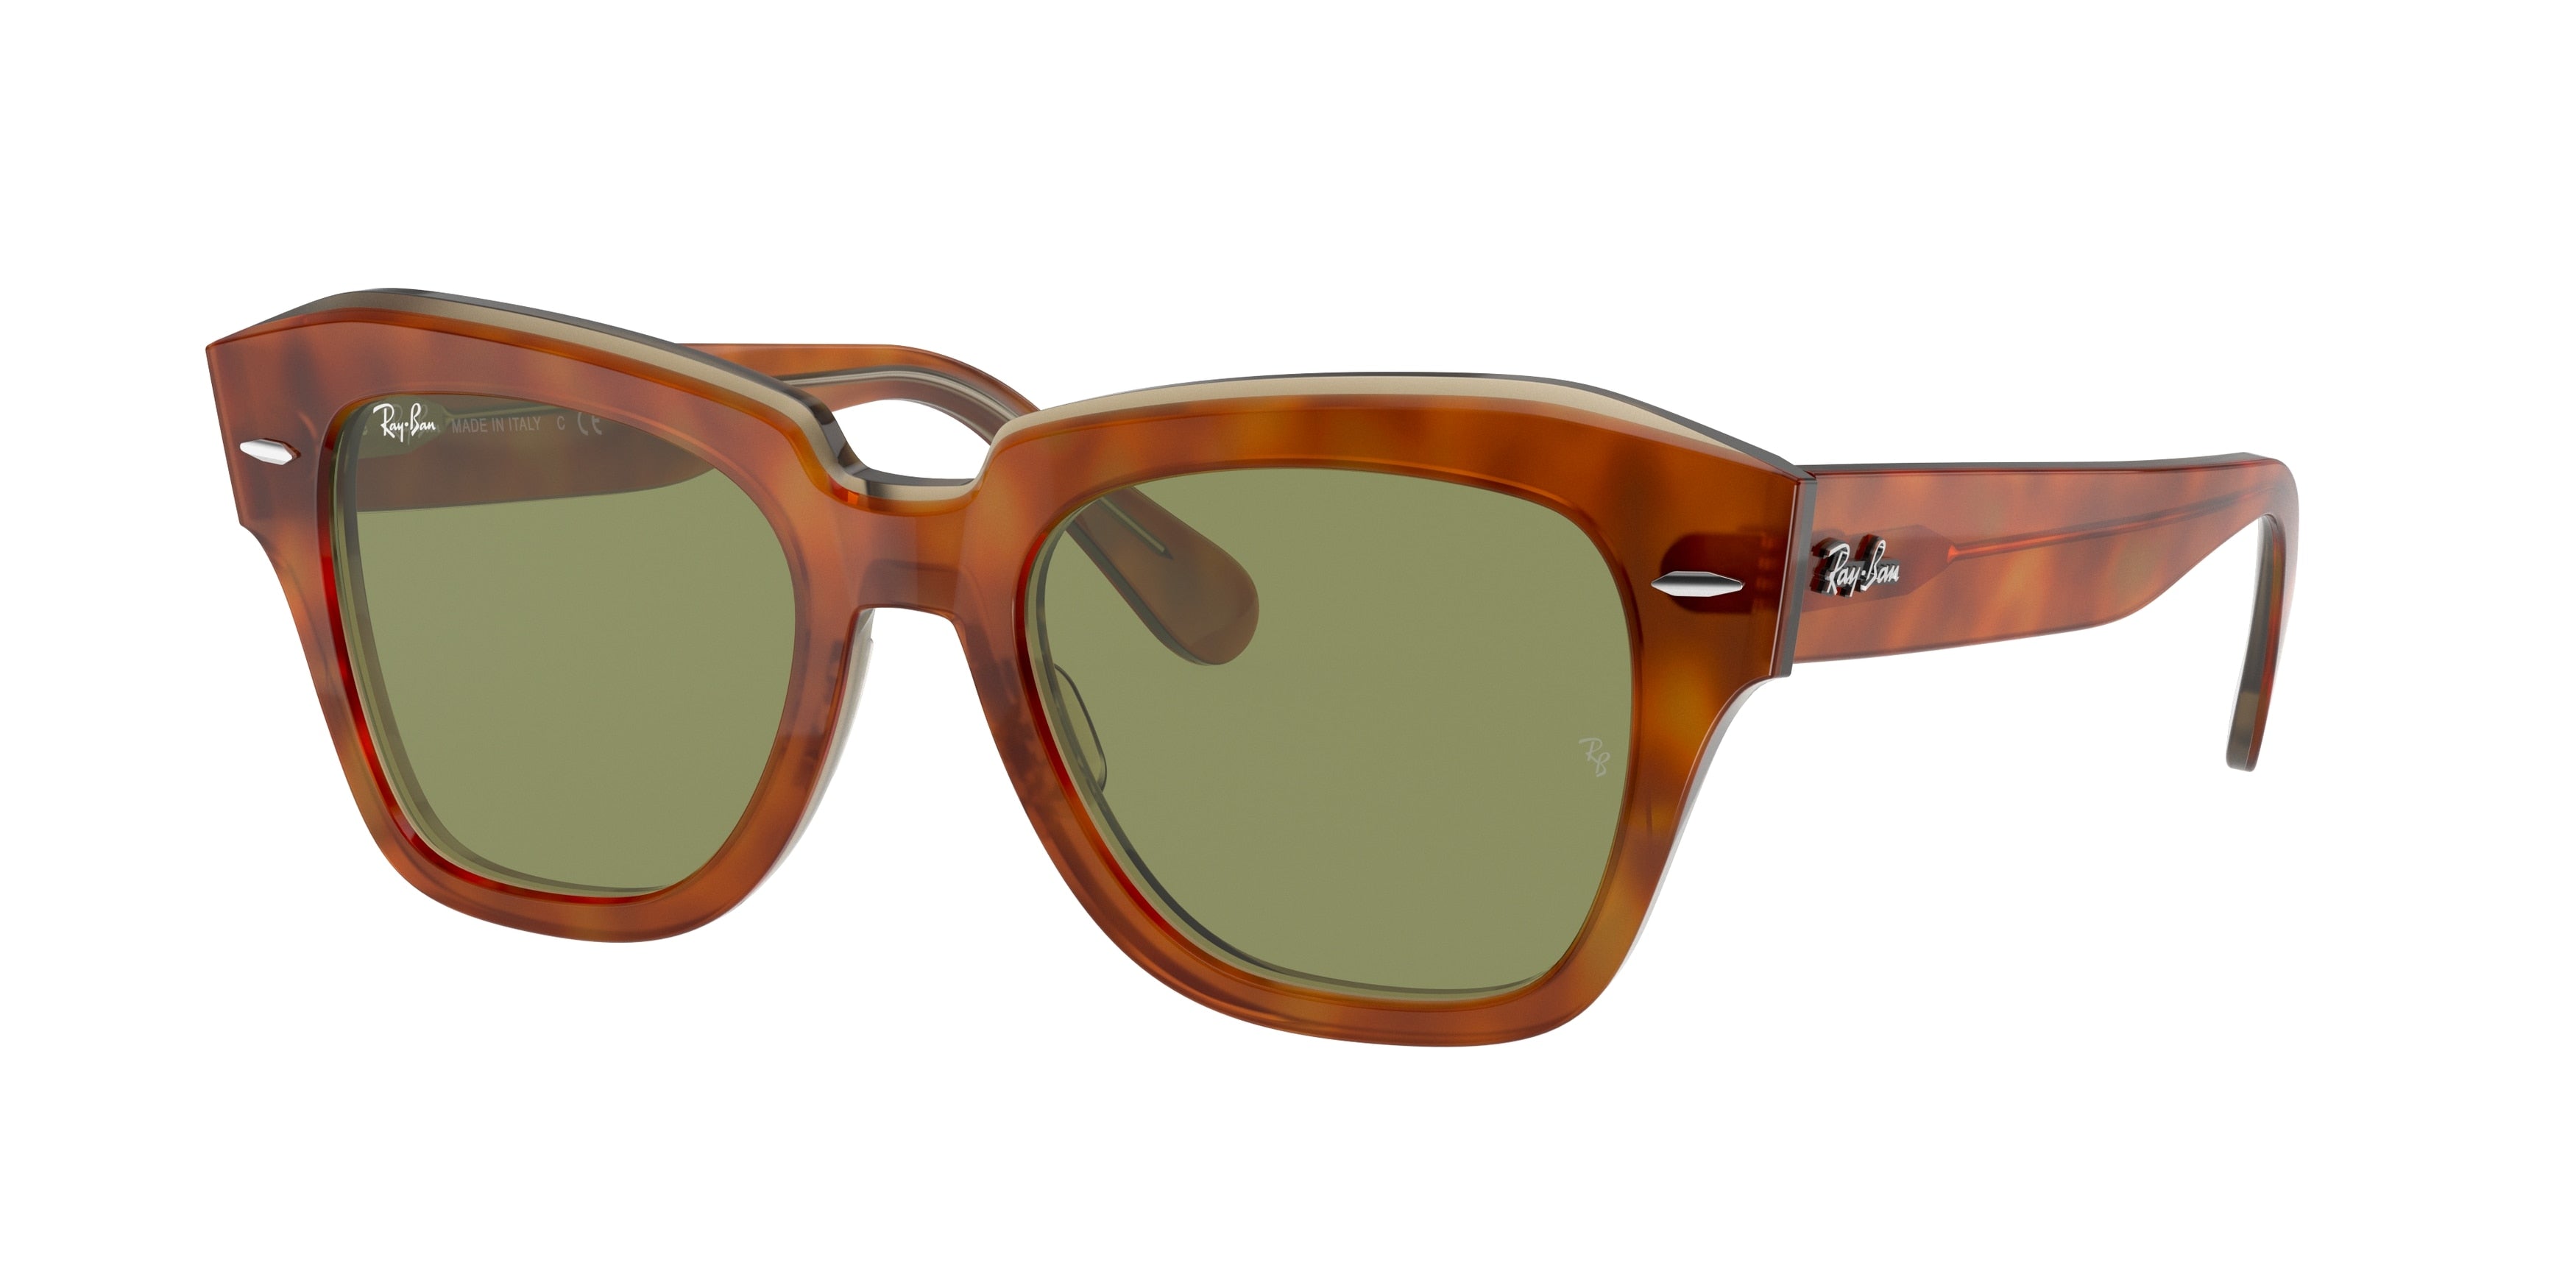 Ray-Ban STATE STREET RB2186 Square Sunglasses  12934E-Havana On Transparent Beige 52-145-20 - Color Map Tortoise